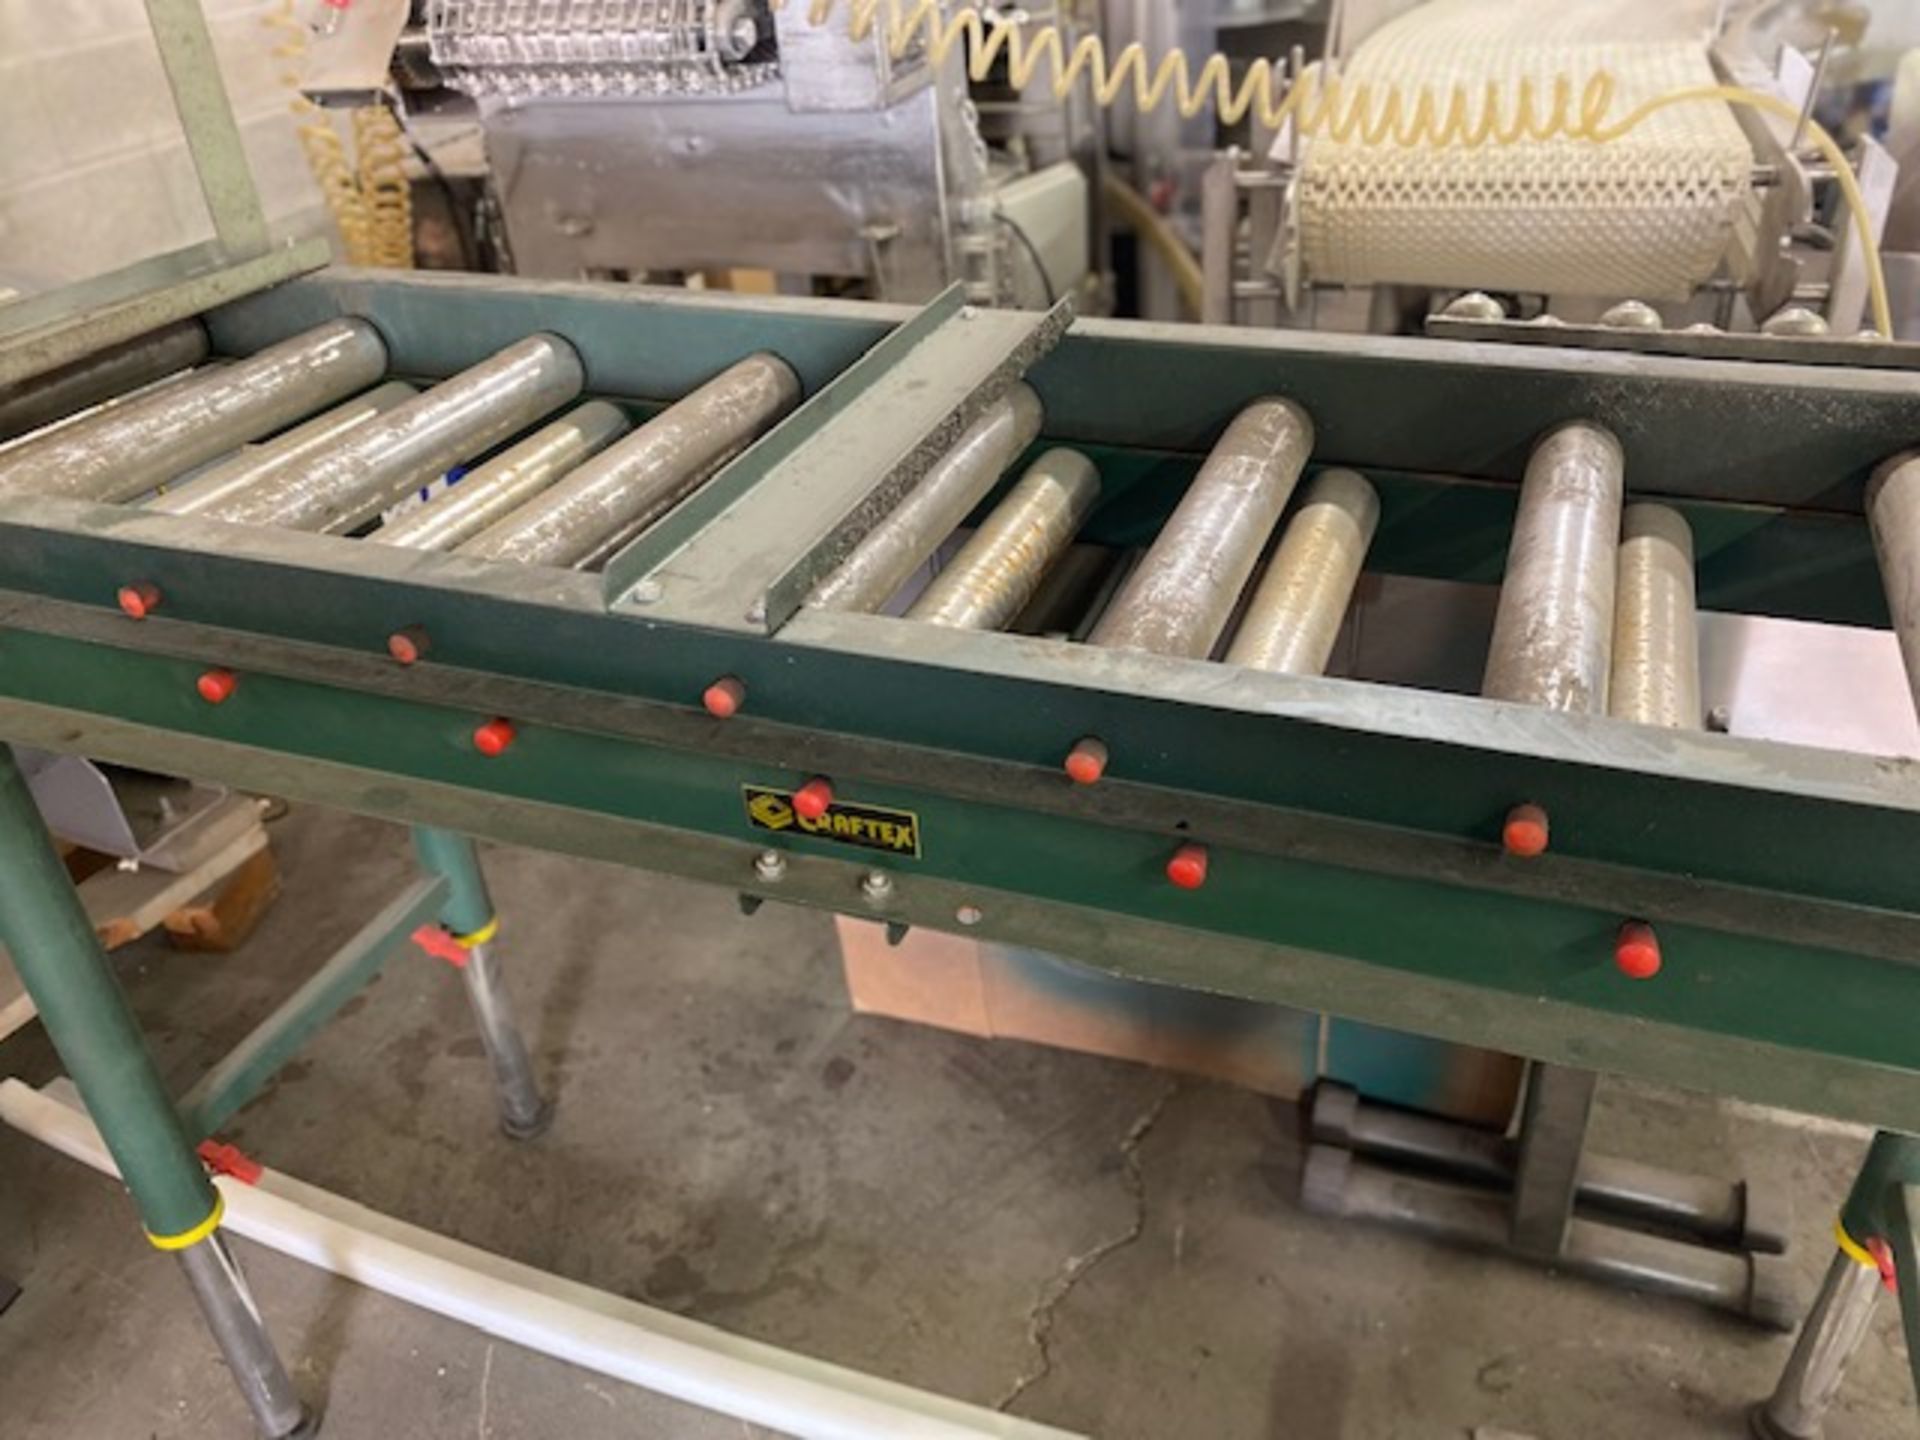 KRAFT TEX, MANUAL CONVEYOR(GREEN), (AS IS WHERE IS) (65"L X 20"W) - Image 2 of 4